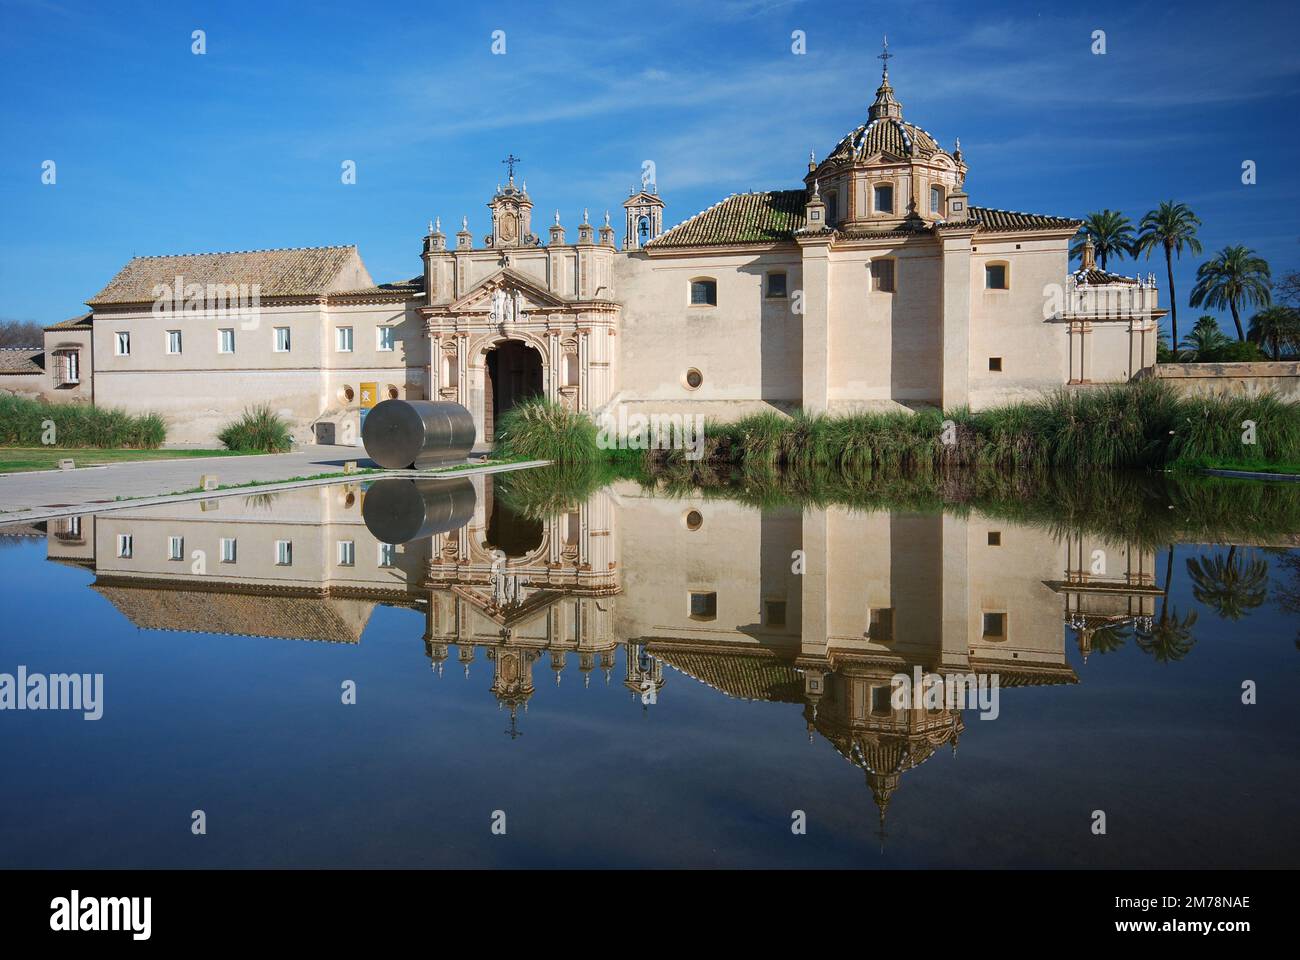 CAAC (Andalusian Center for Contemporary Art) - Seville, Andalusia, Spain Stock Photo